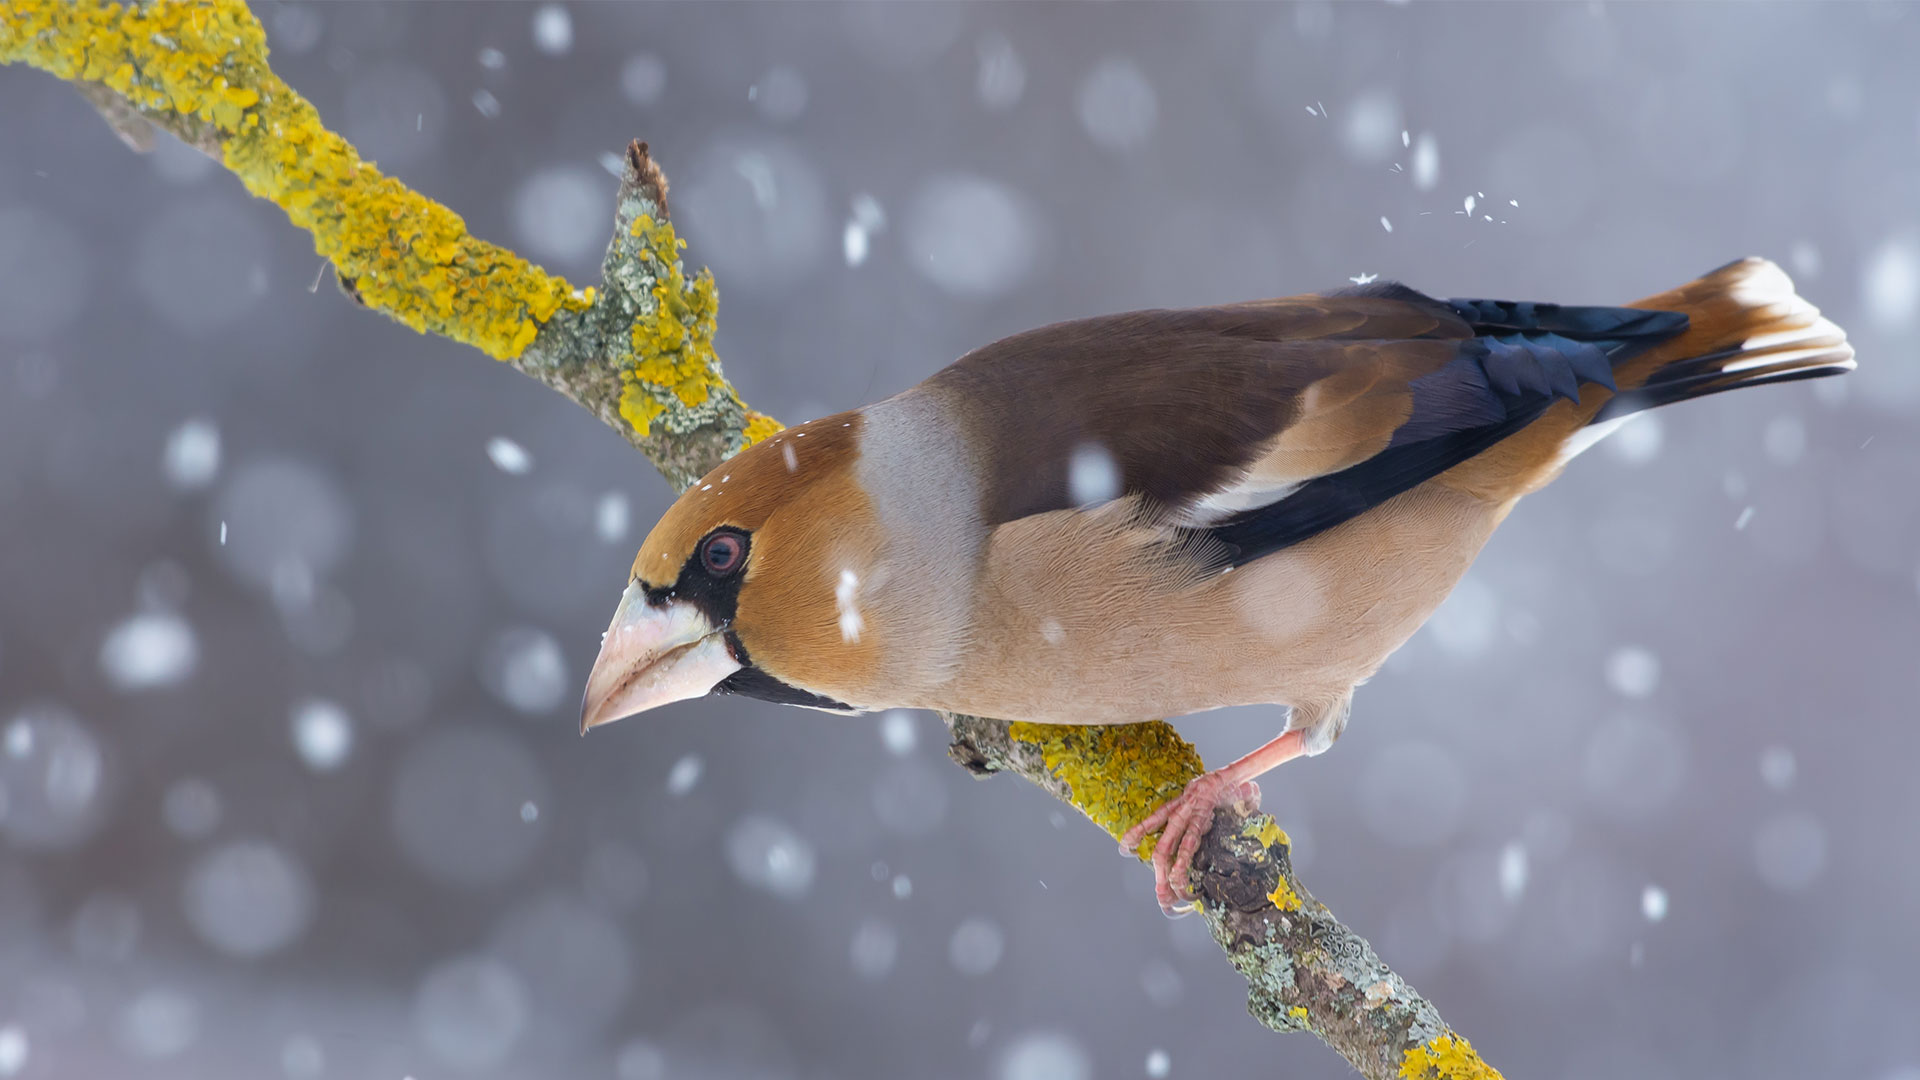 Male hawfinch perched on a branch in snow